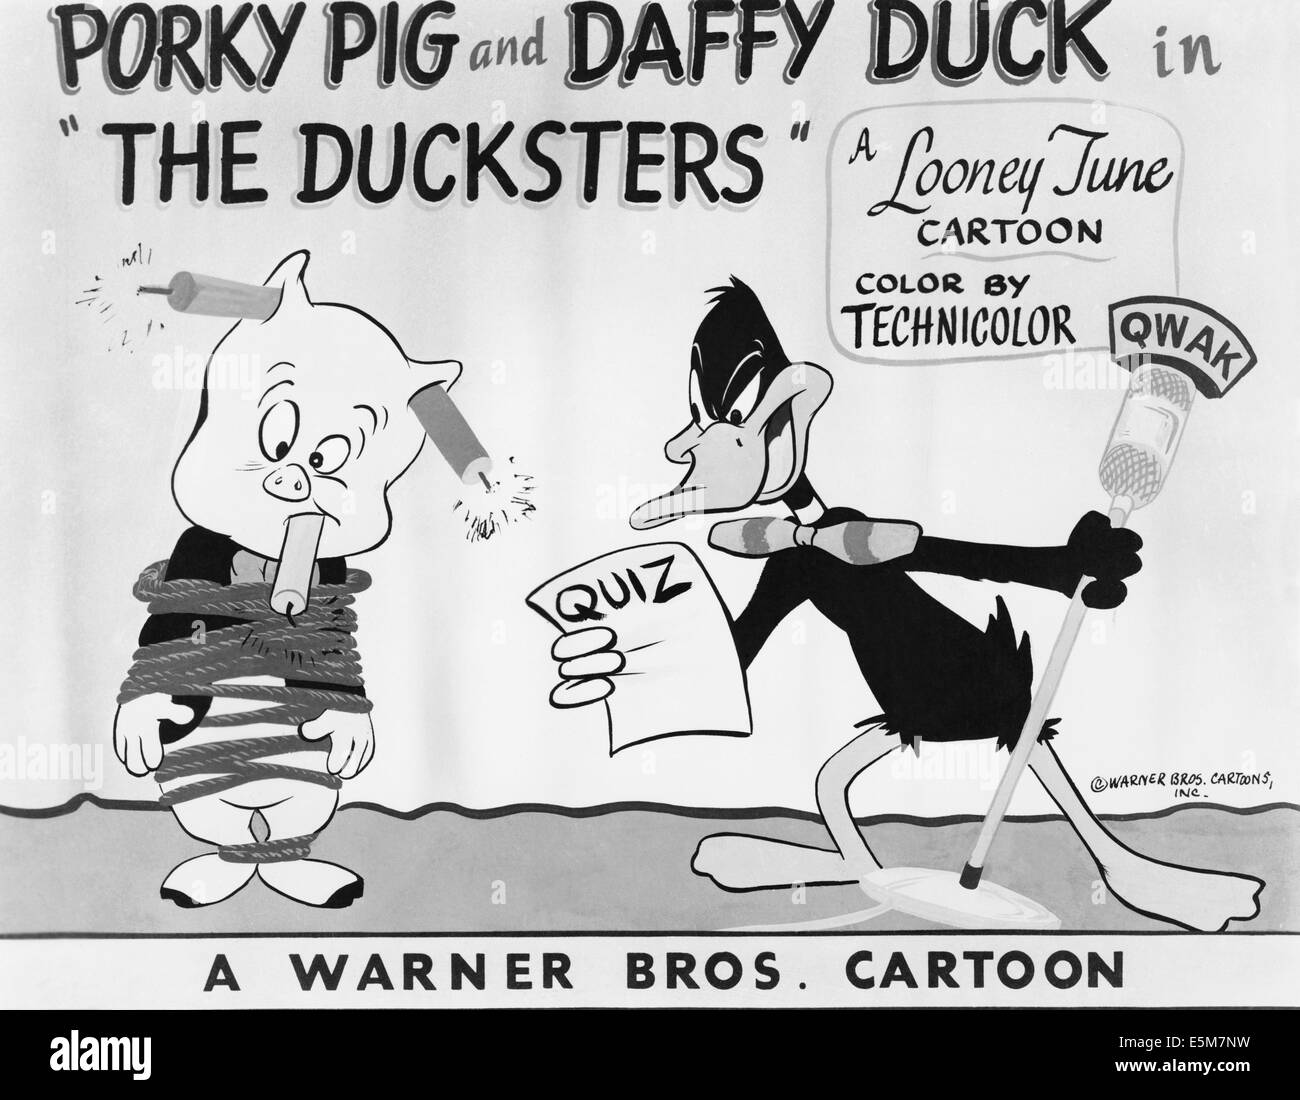 THE DUCKSTERS, US lobbycard, from left: Porky Pig, Daffy Duck, 1950 Stock Photo